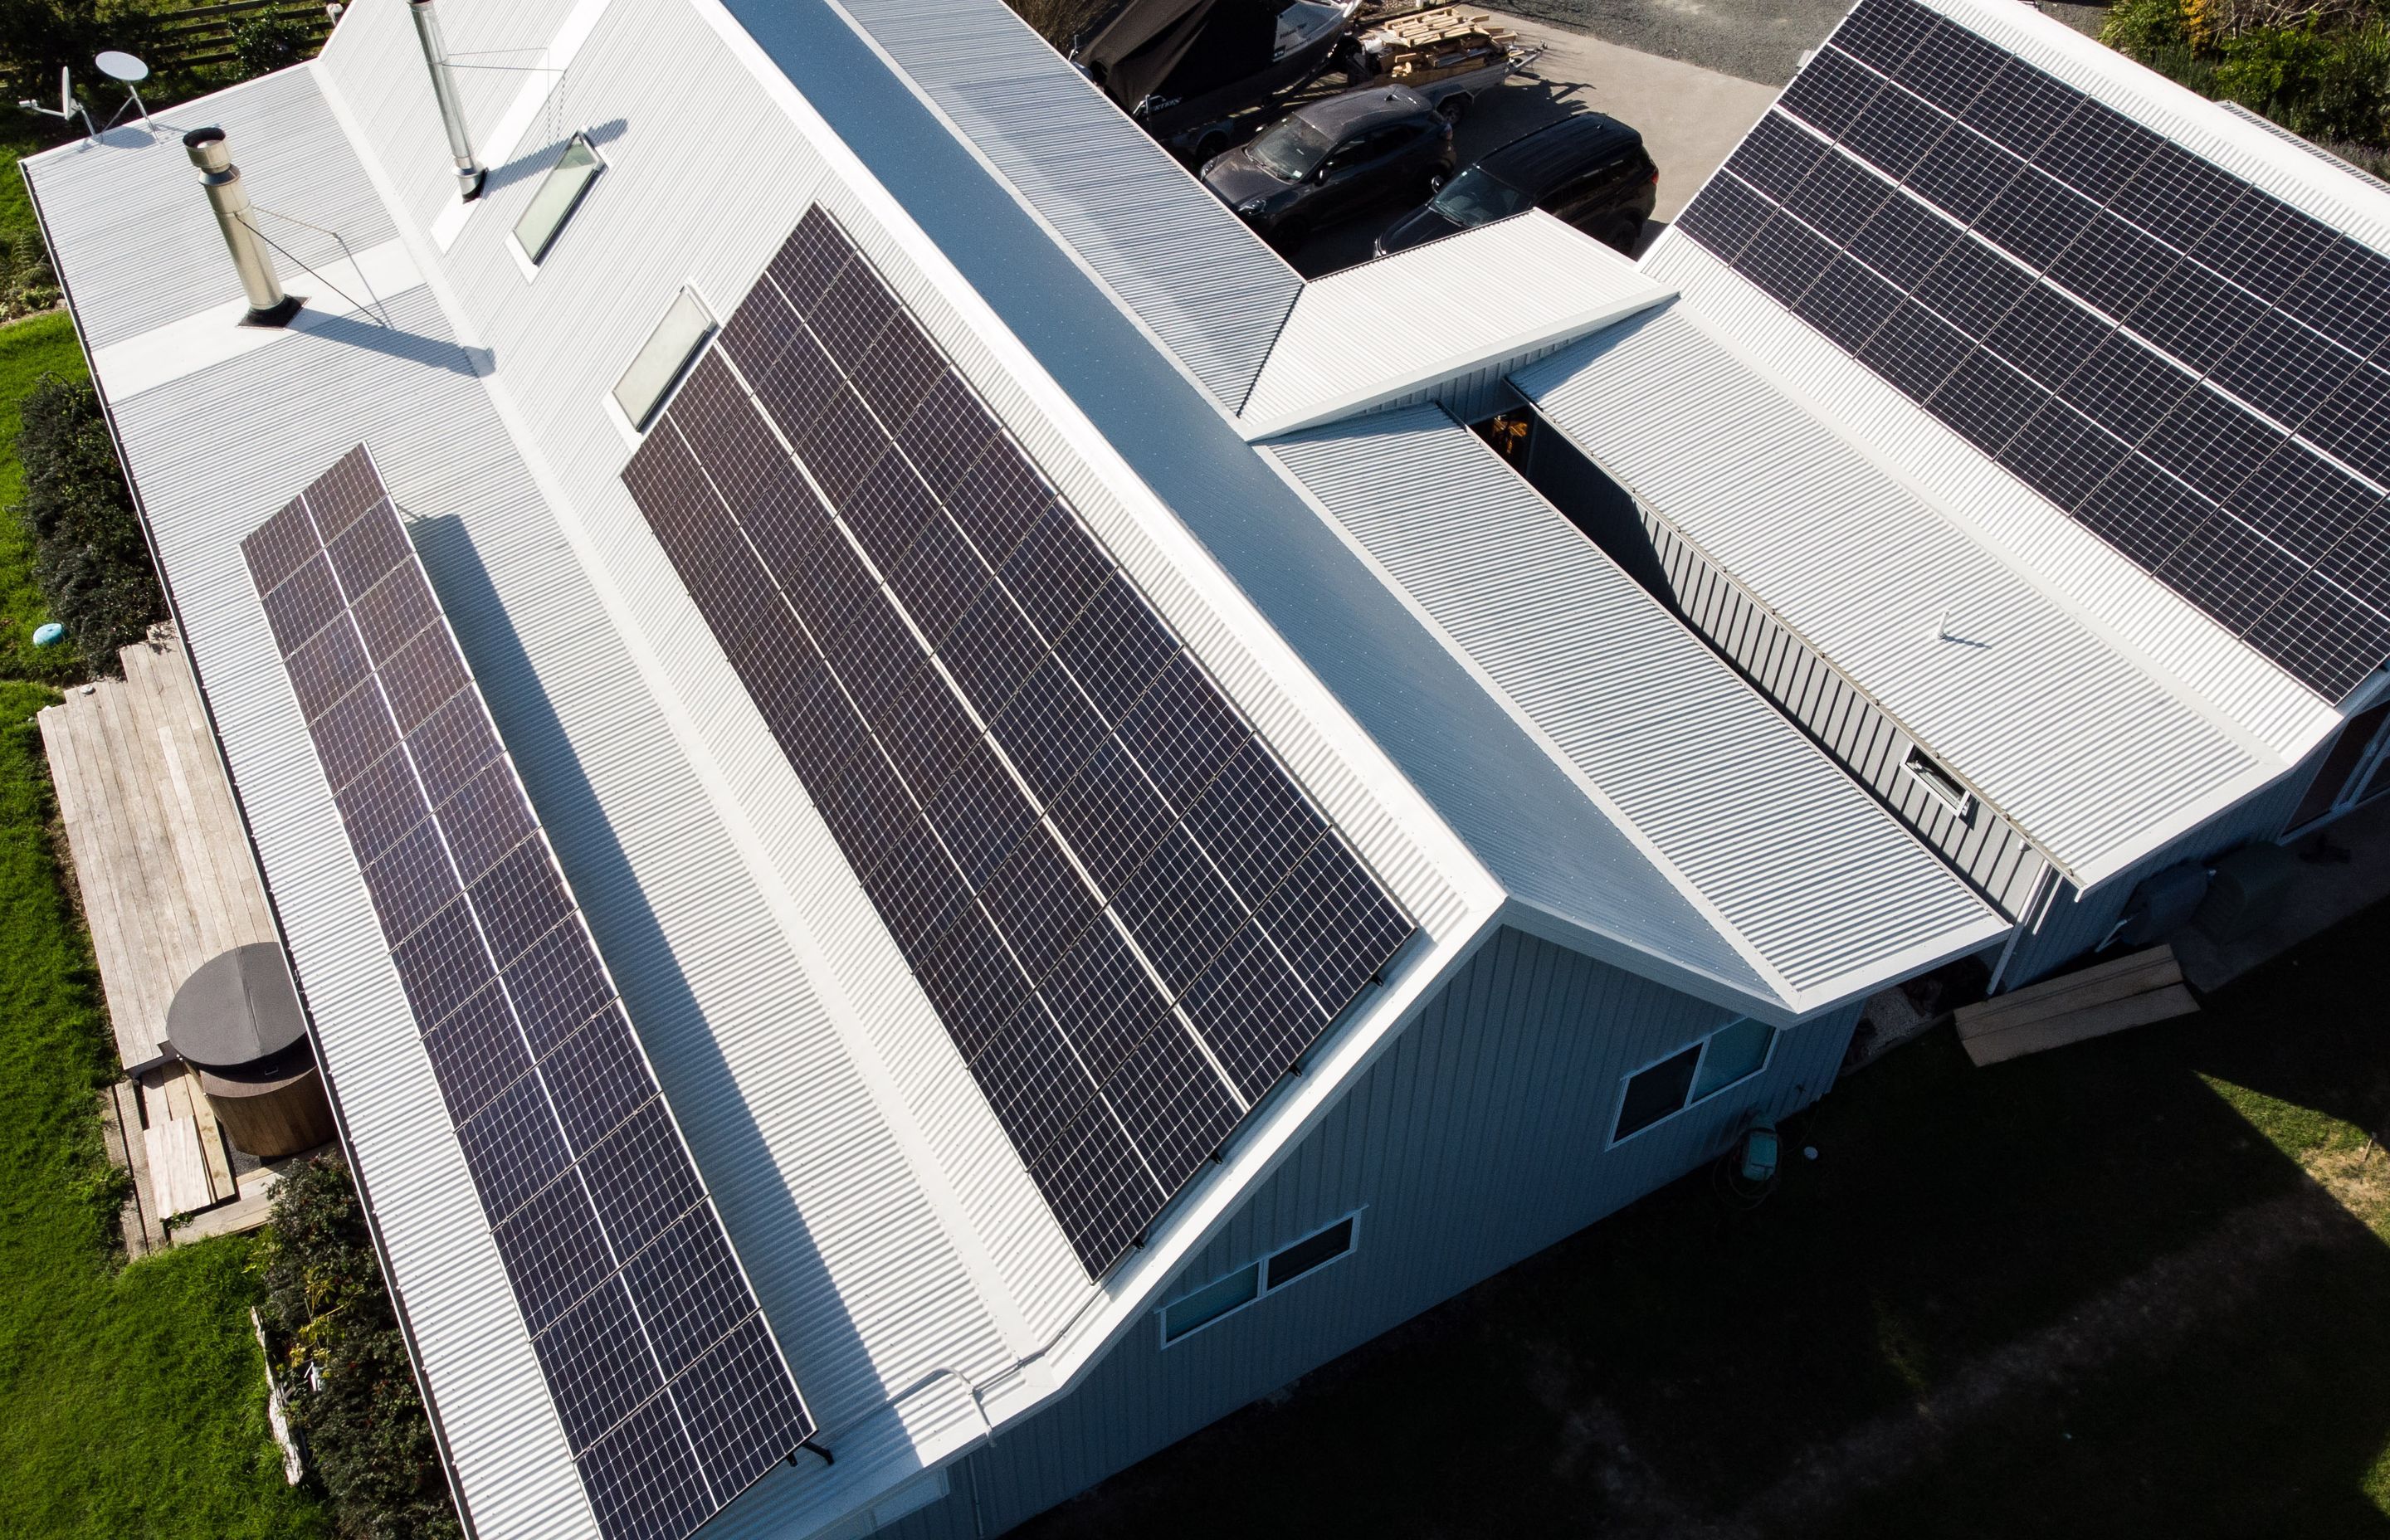 Solarcraft has three different solar systems it recommends based on the customers' needs.